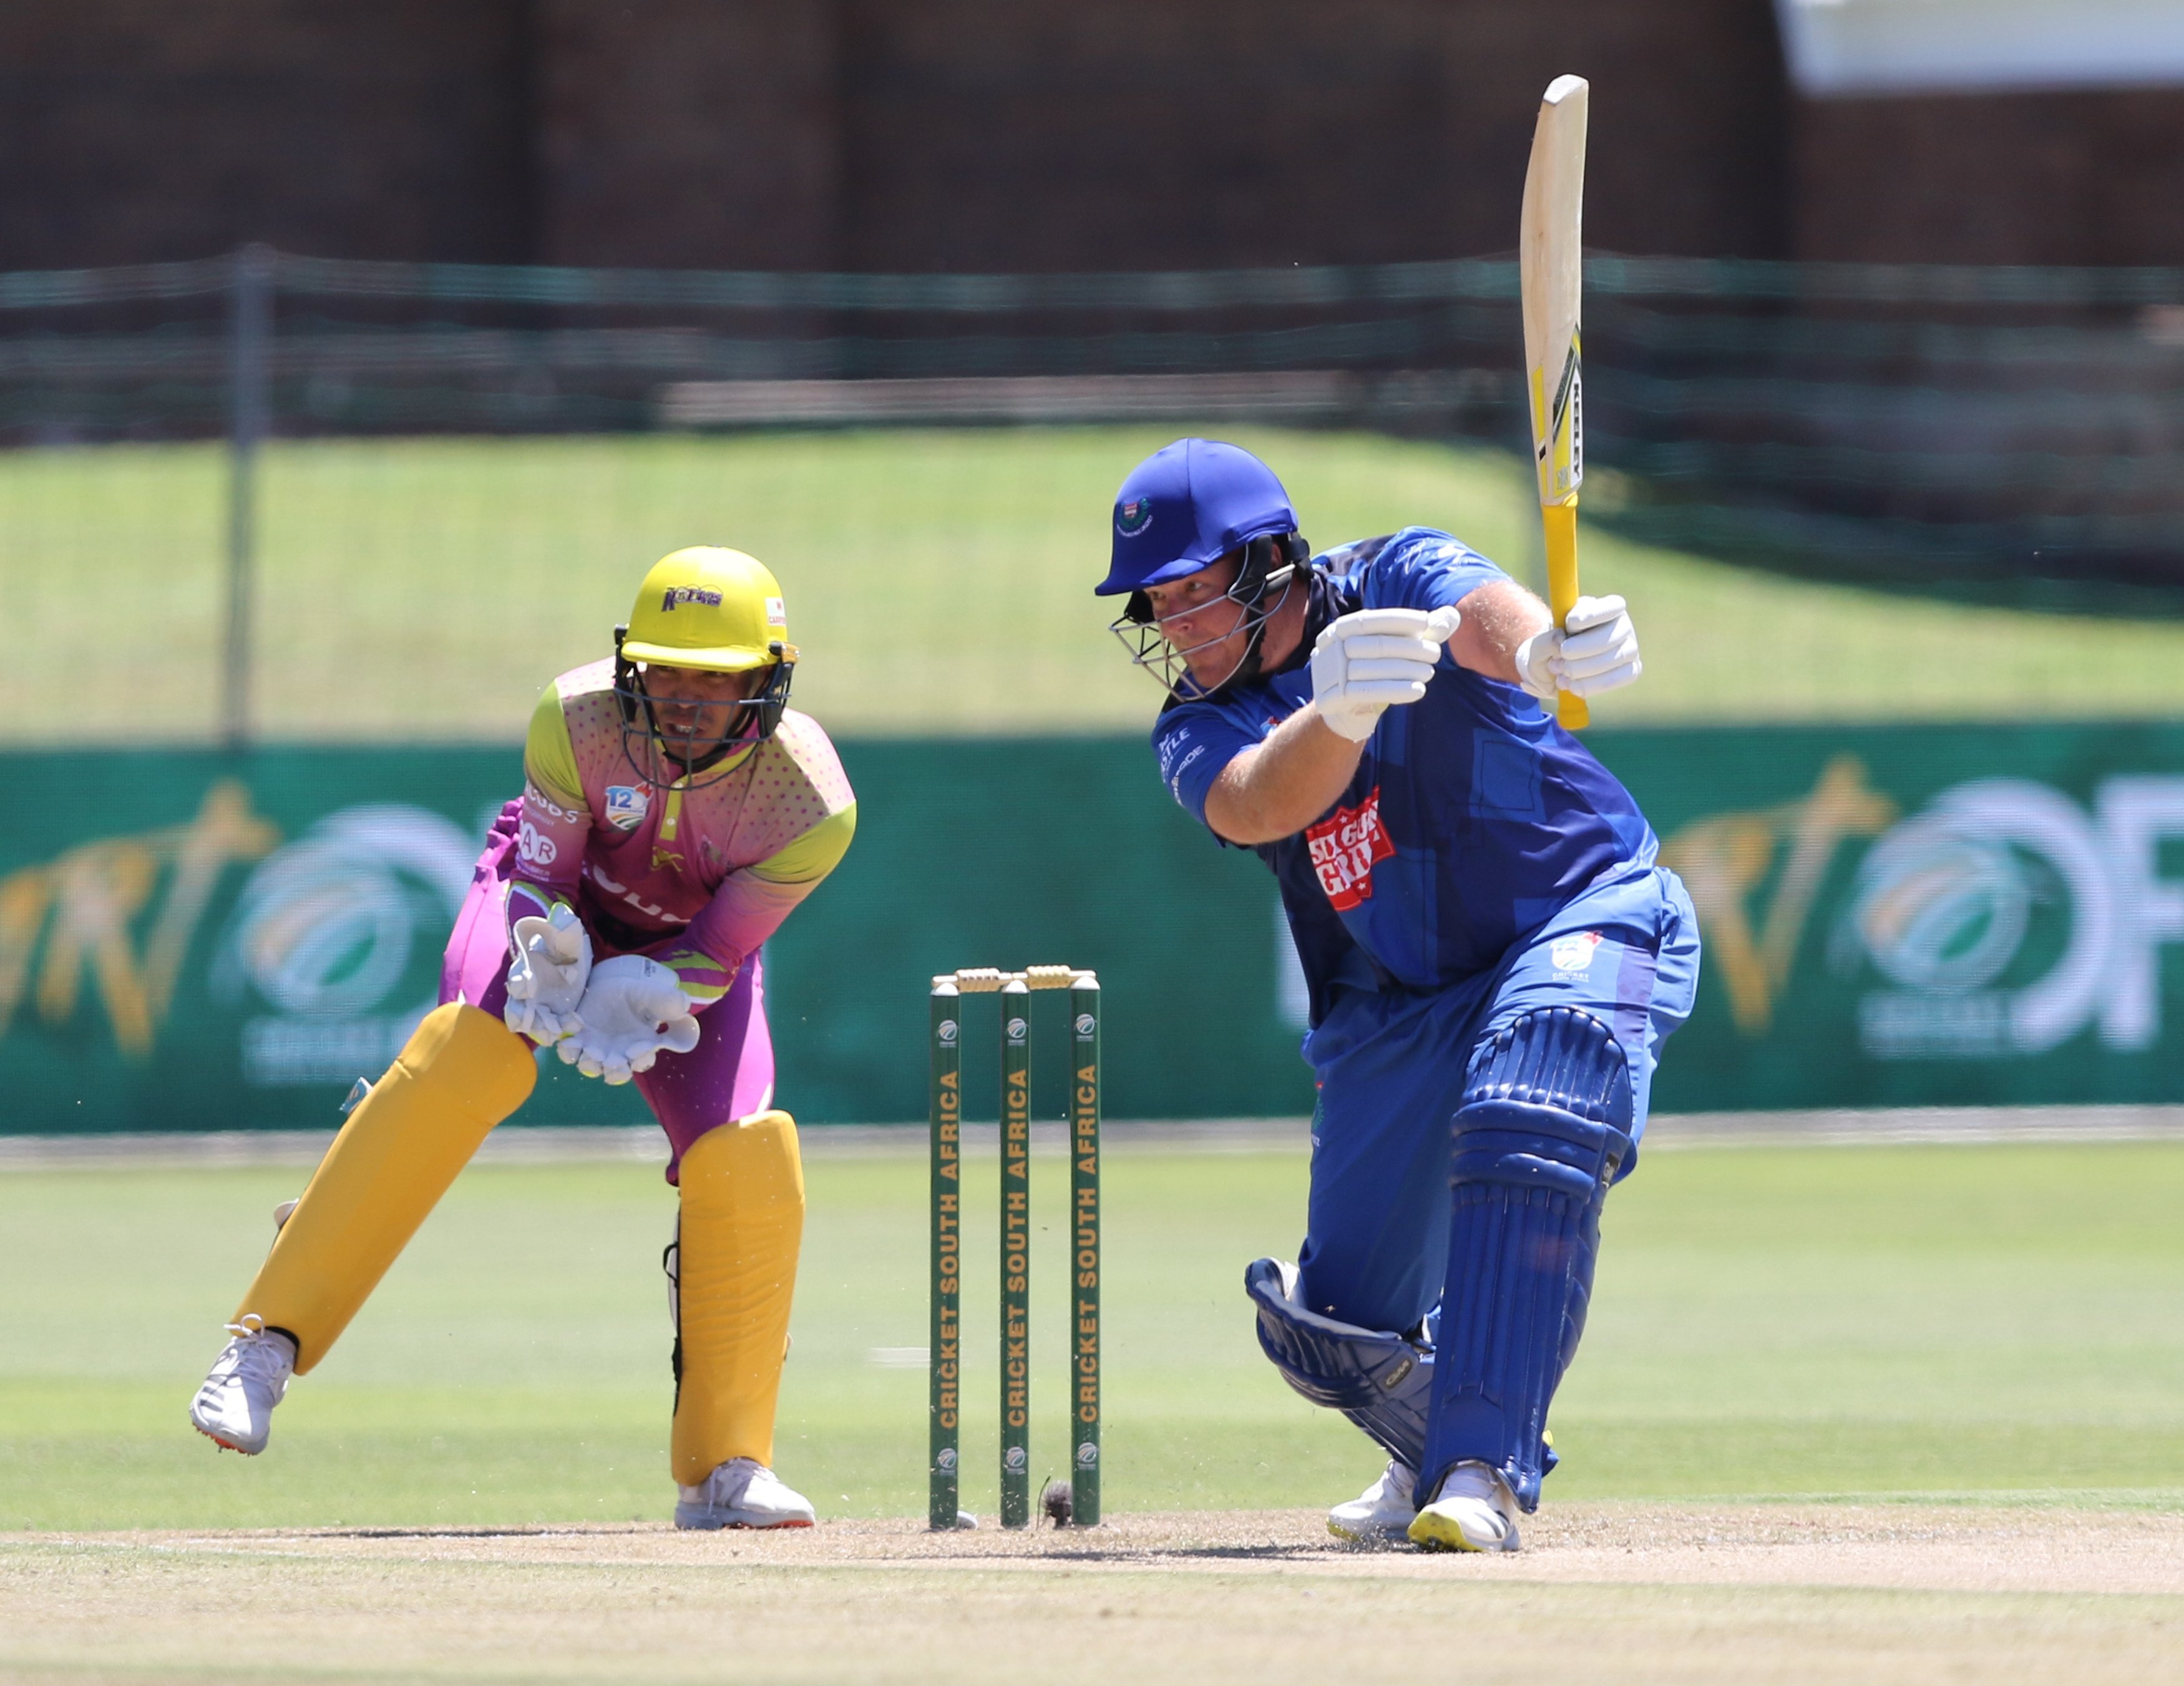 Richard Levi posing after cutting the ball down the off-side. WP opener vs GbetsRocks in 2022 CSA T20 Challenge opener.